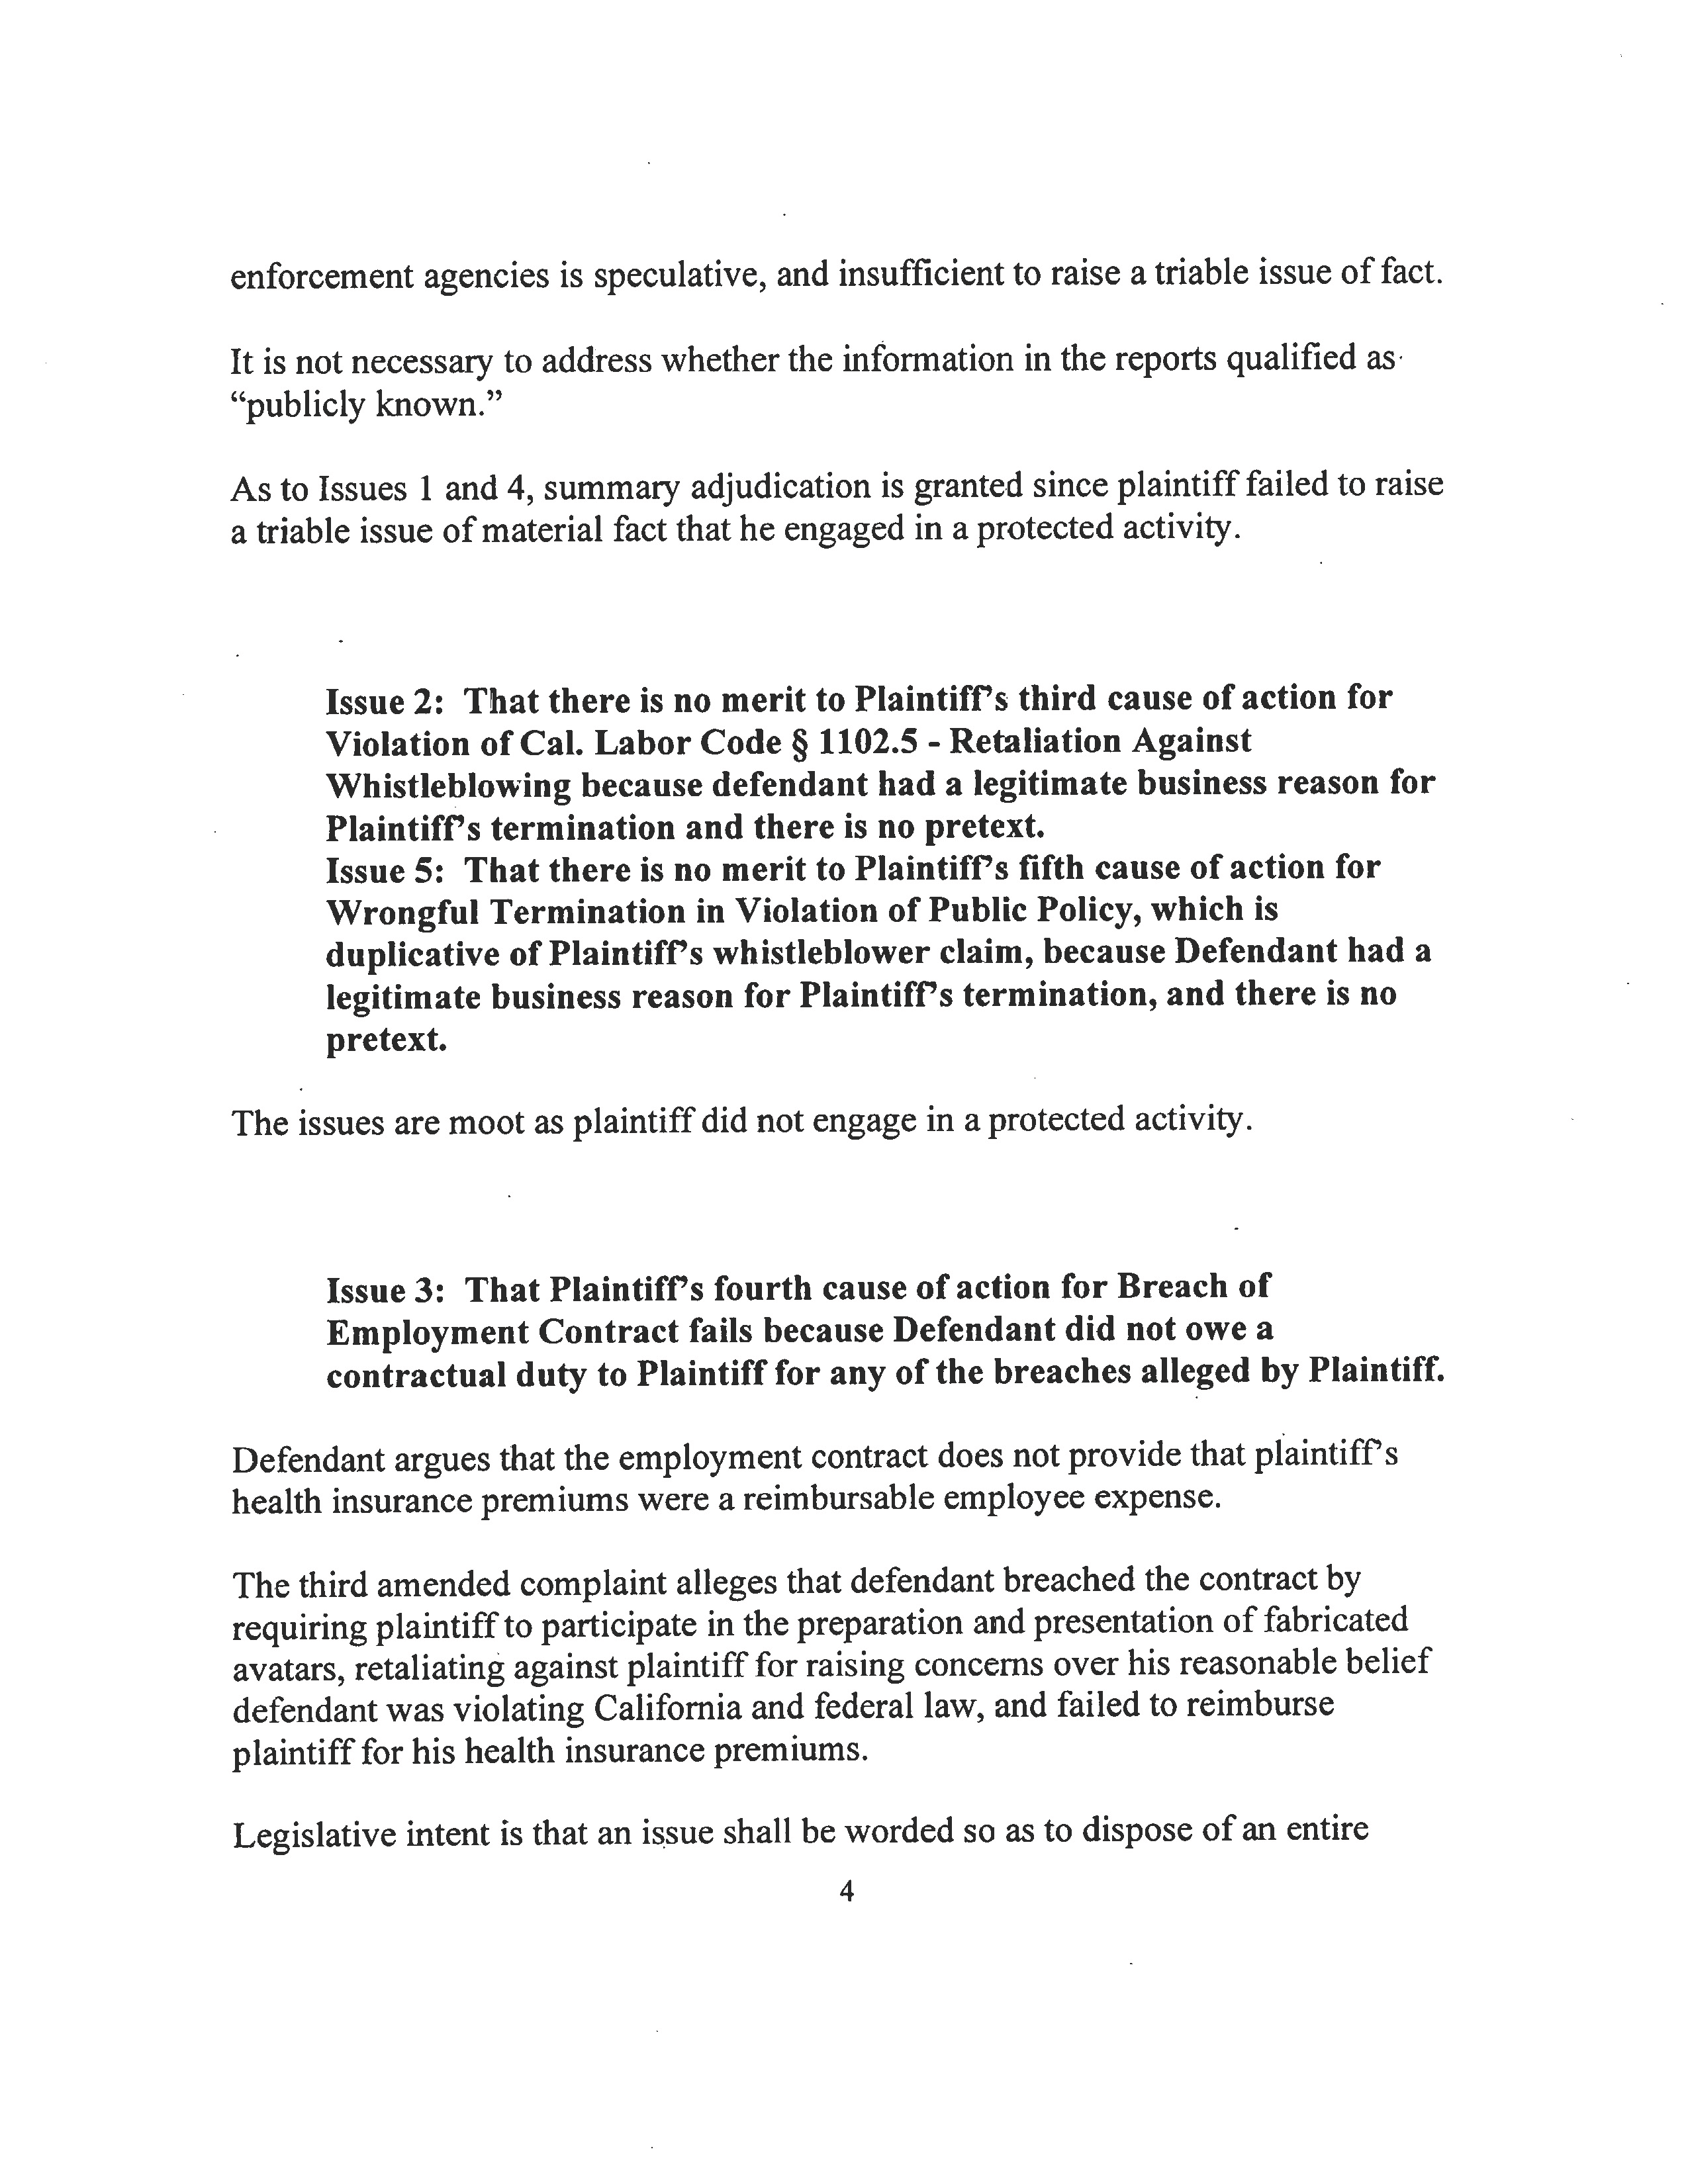 Court Ruling on Pinscreen's and Hao Li's Motion for Summary Judgment - Full Page 4